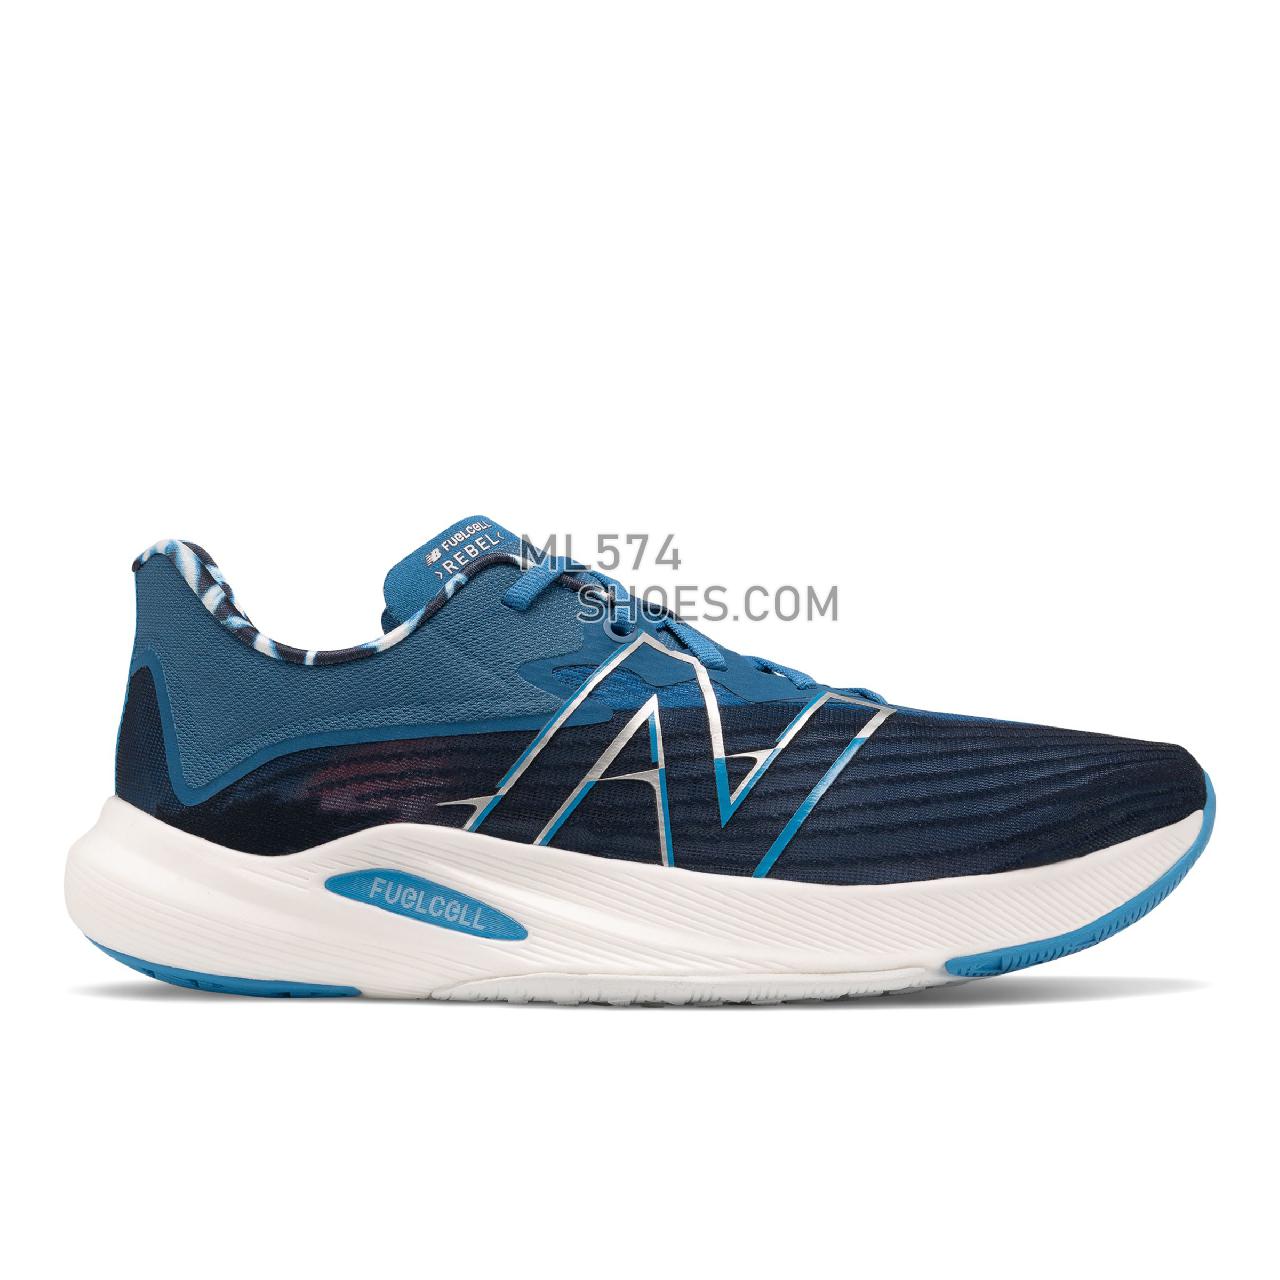 New Balance FuelCell Rebel v2 - Men's Fuelcell Sleek And LightWeight - Eclipse with Neo Flame - MFCXZ2